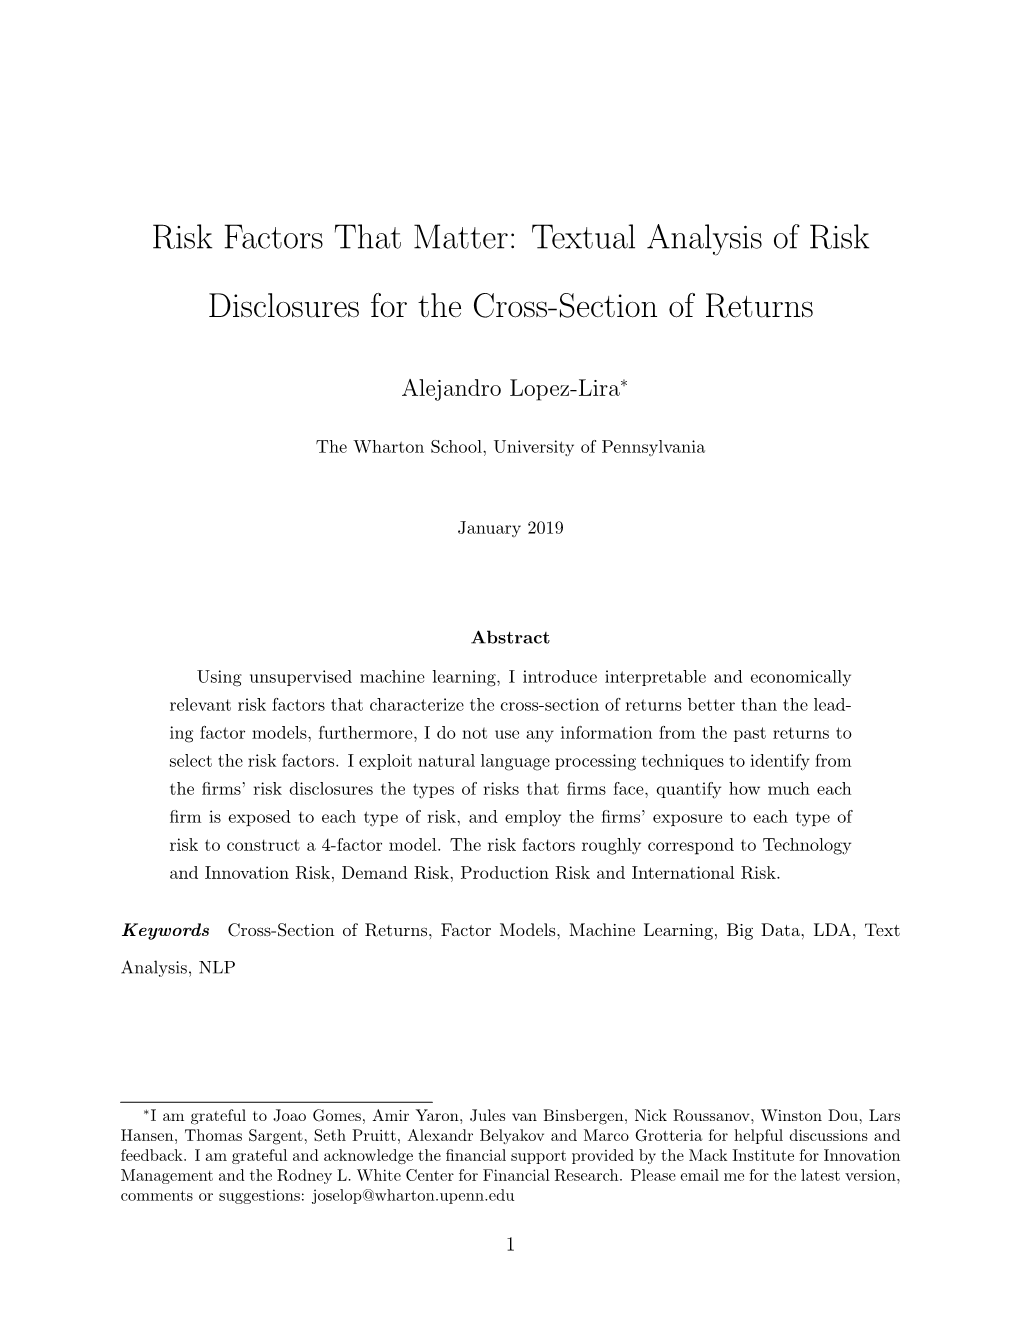 Textual Analysis of Risk Disclosures for the Cross-Section of Returns